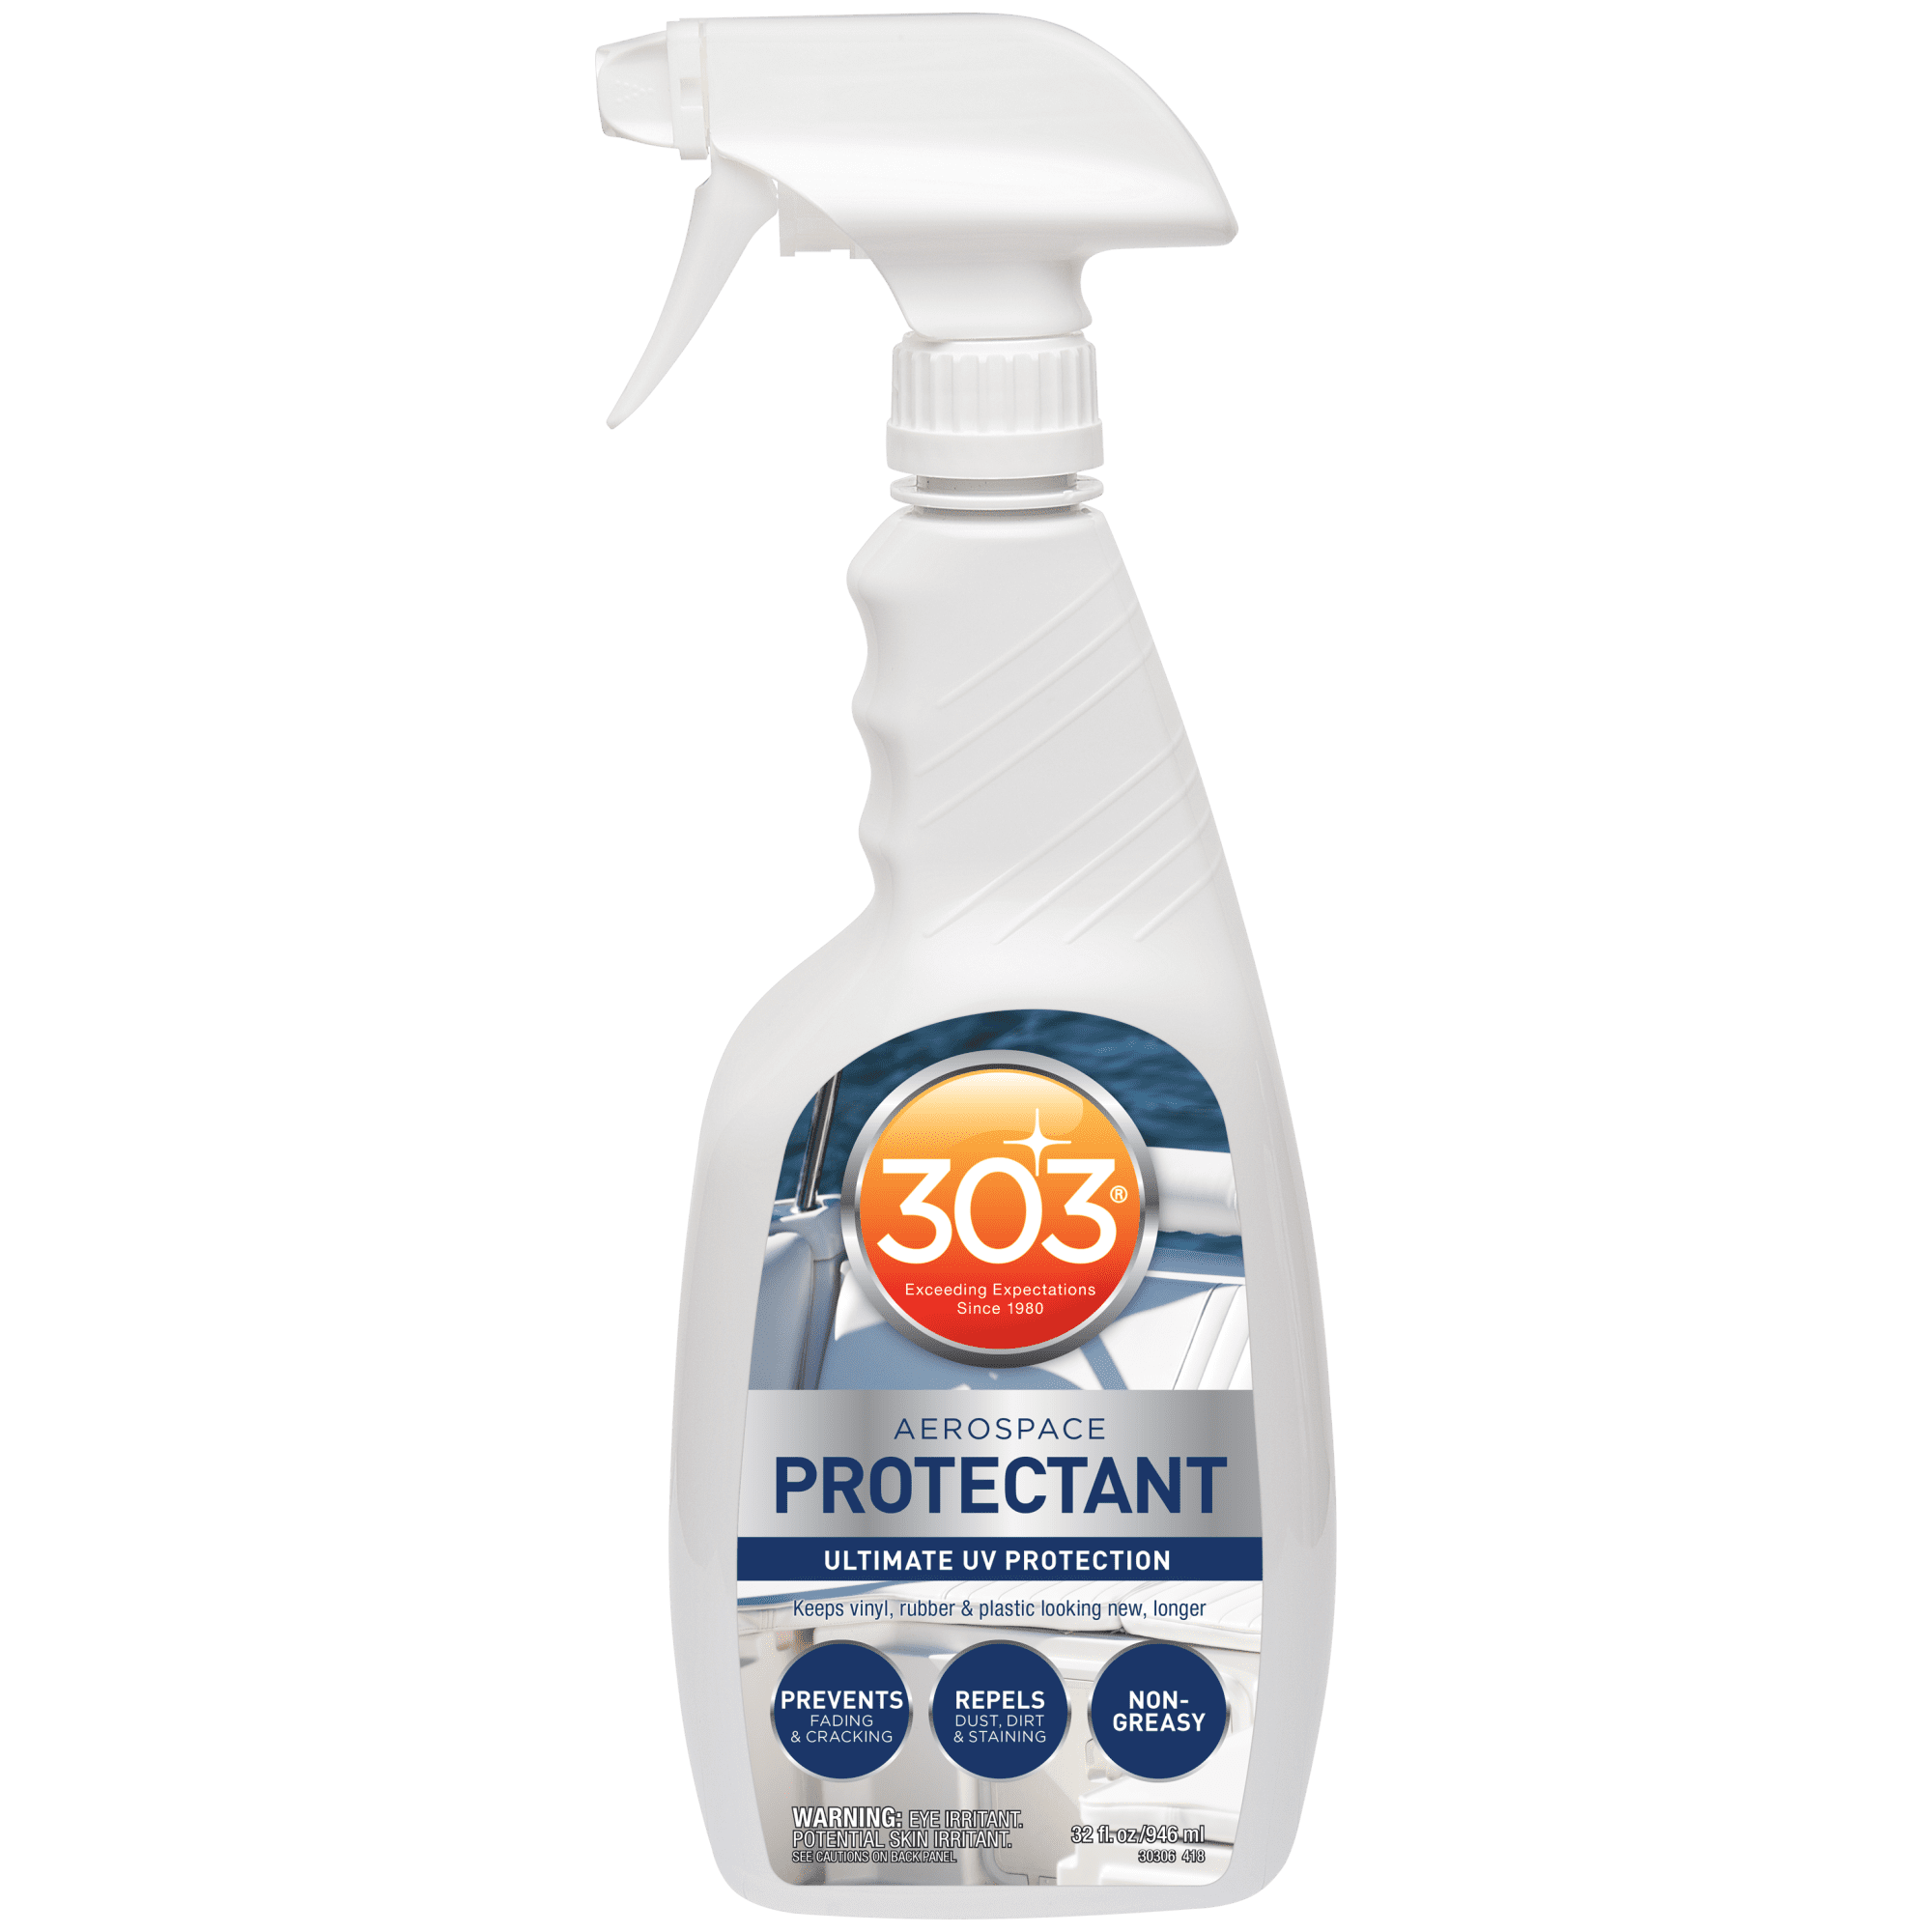 303 Marine Aerospace Protectant Provides Superior UV Protection, Repels  Dust, Dirt,  Staining Dries To A Matte Finish Restores A Like-New  Appearance, 32oz (30306) Packaging May Vary